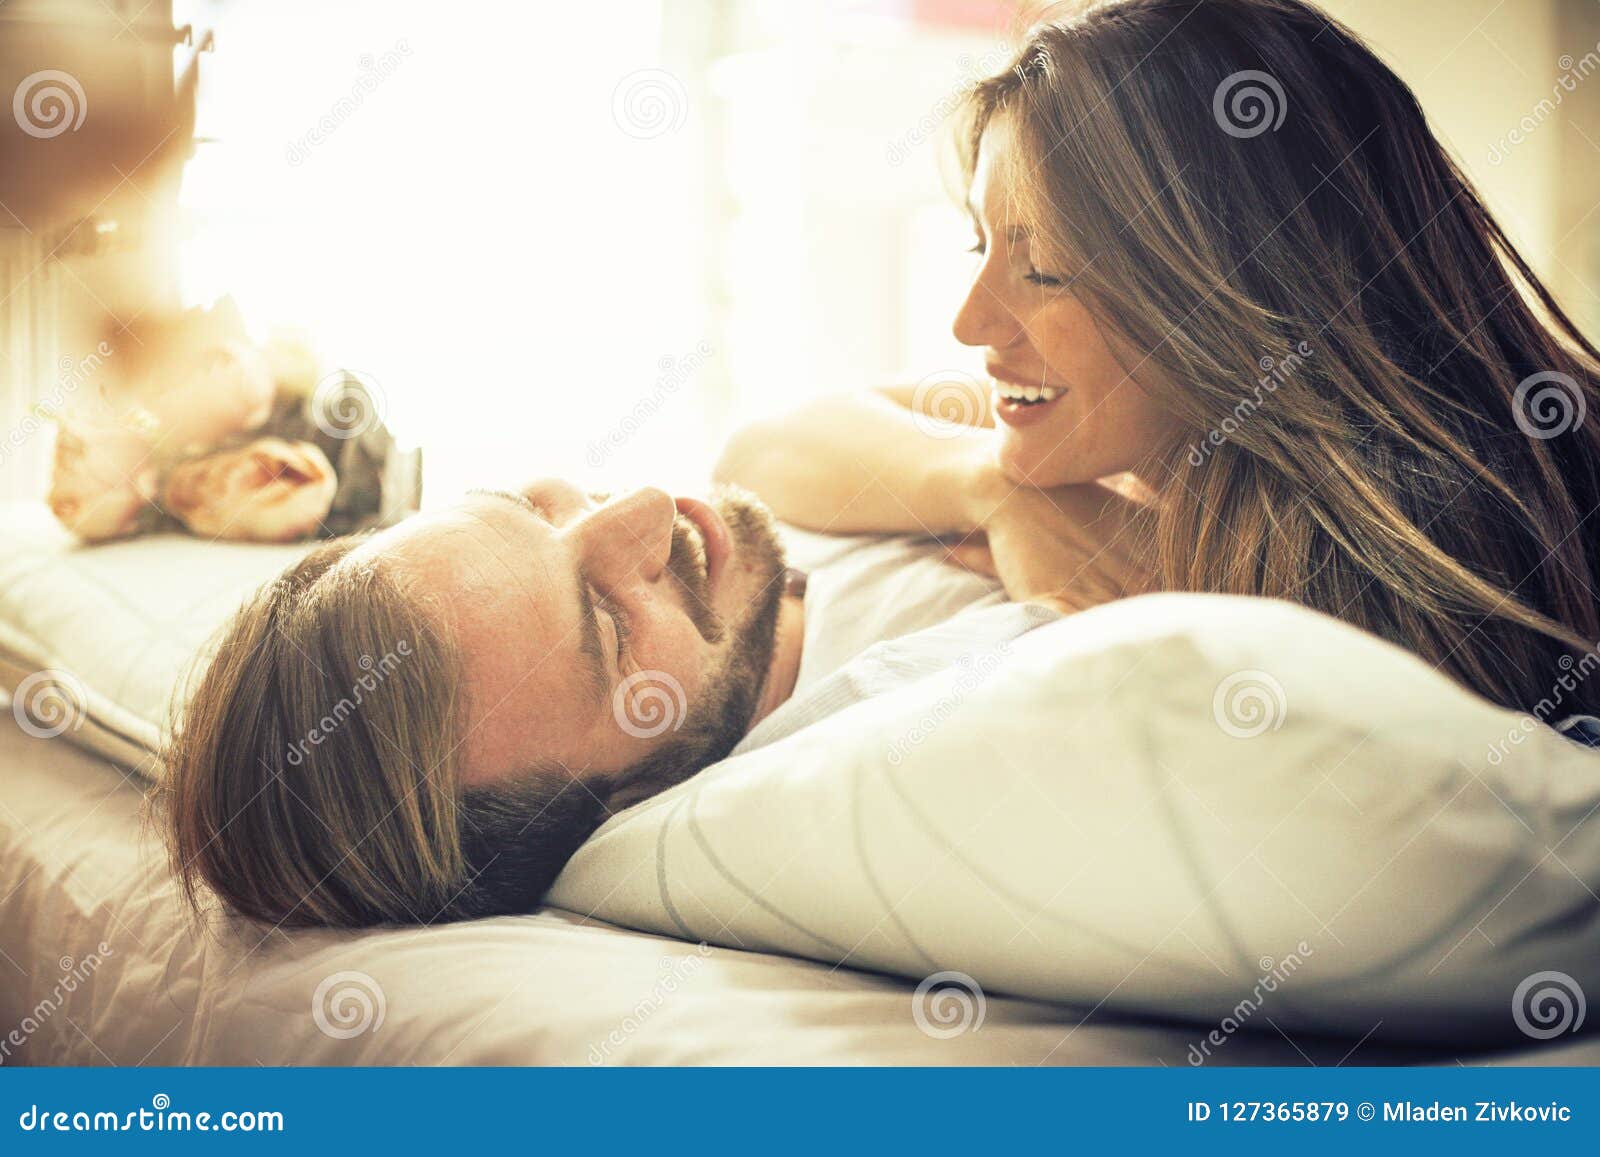 Good morning handsome. stock image. Image of domestic - 127365879